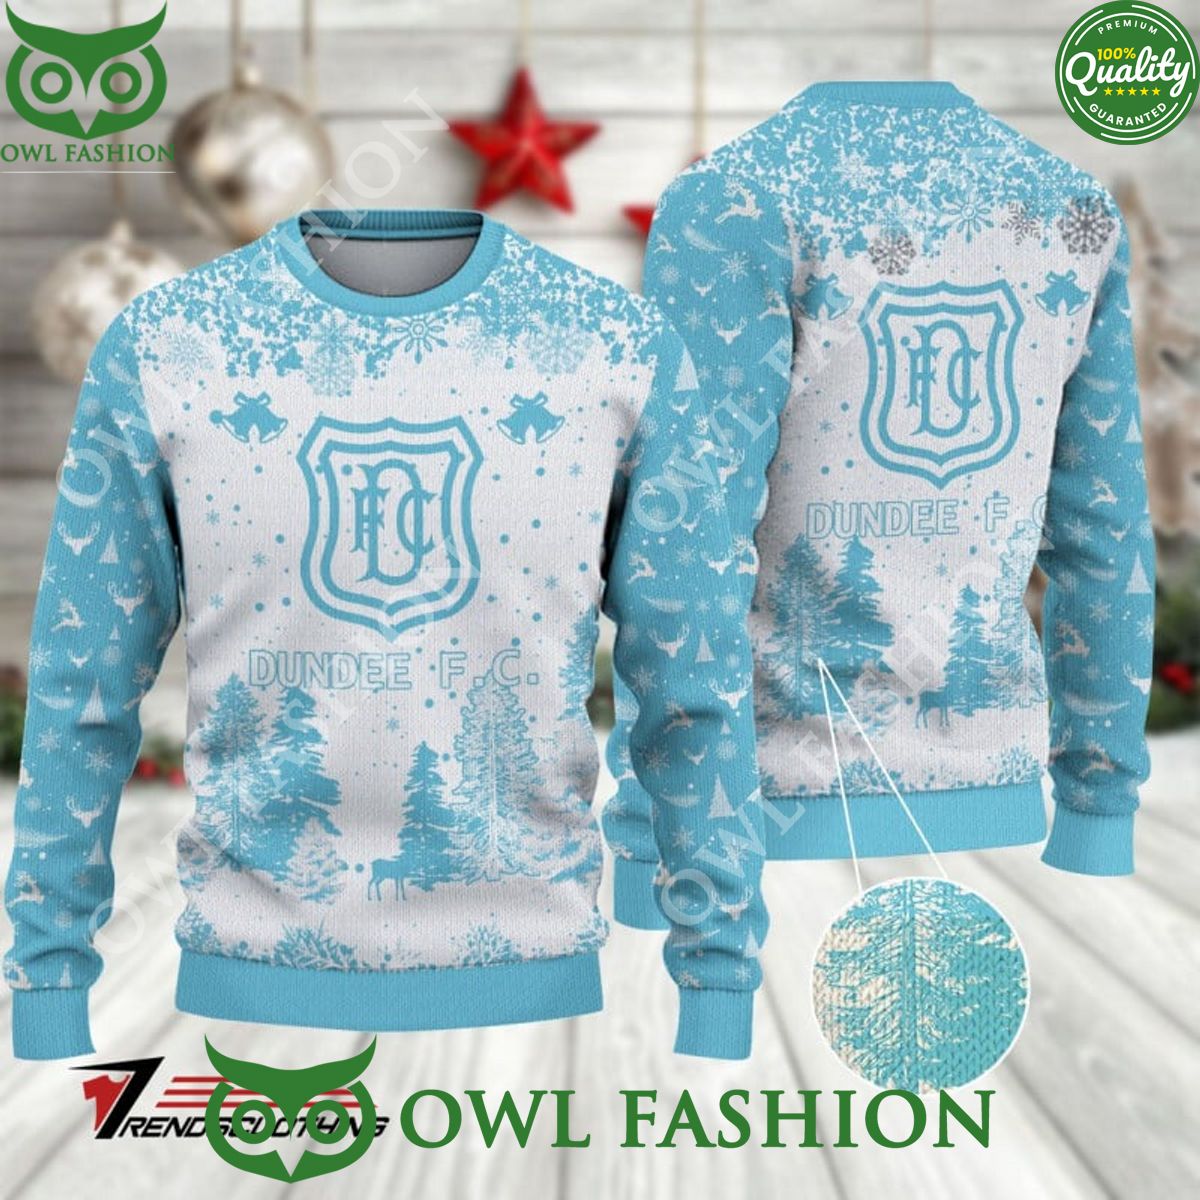 Dundee F.C. SPFL Scottish Snow Fall Pine Ugly sweater jumper